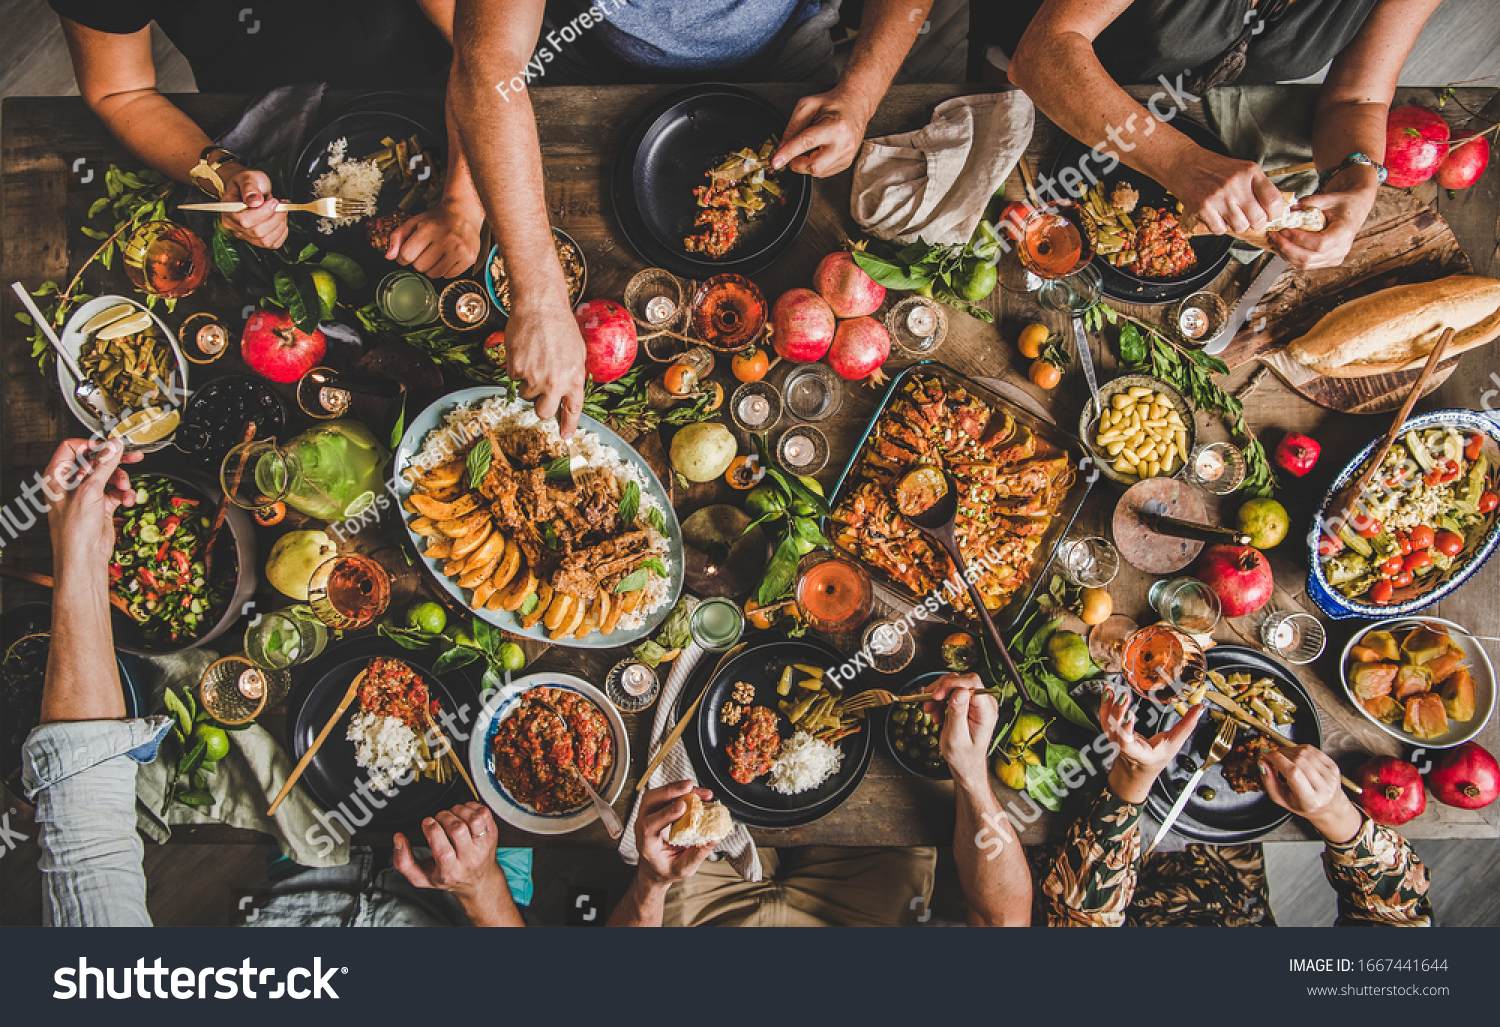 Flat-lay of family feasting with Turkish cuisine lamb chops, quince, bean, vegetable salad, babaganush, rice pilav, pumpkin dessert, lemonade over rustic table, top view. Middle East cuisine #1667441644